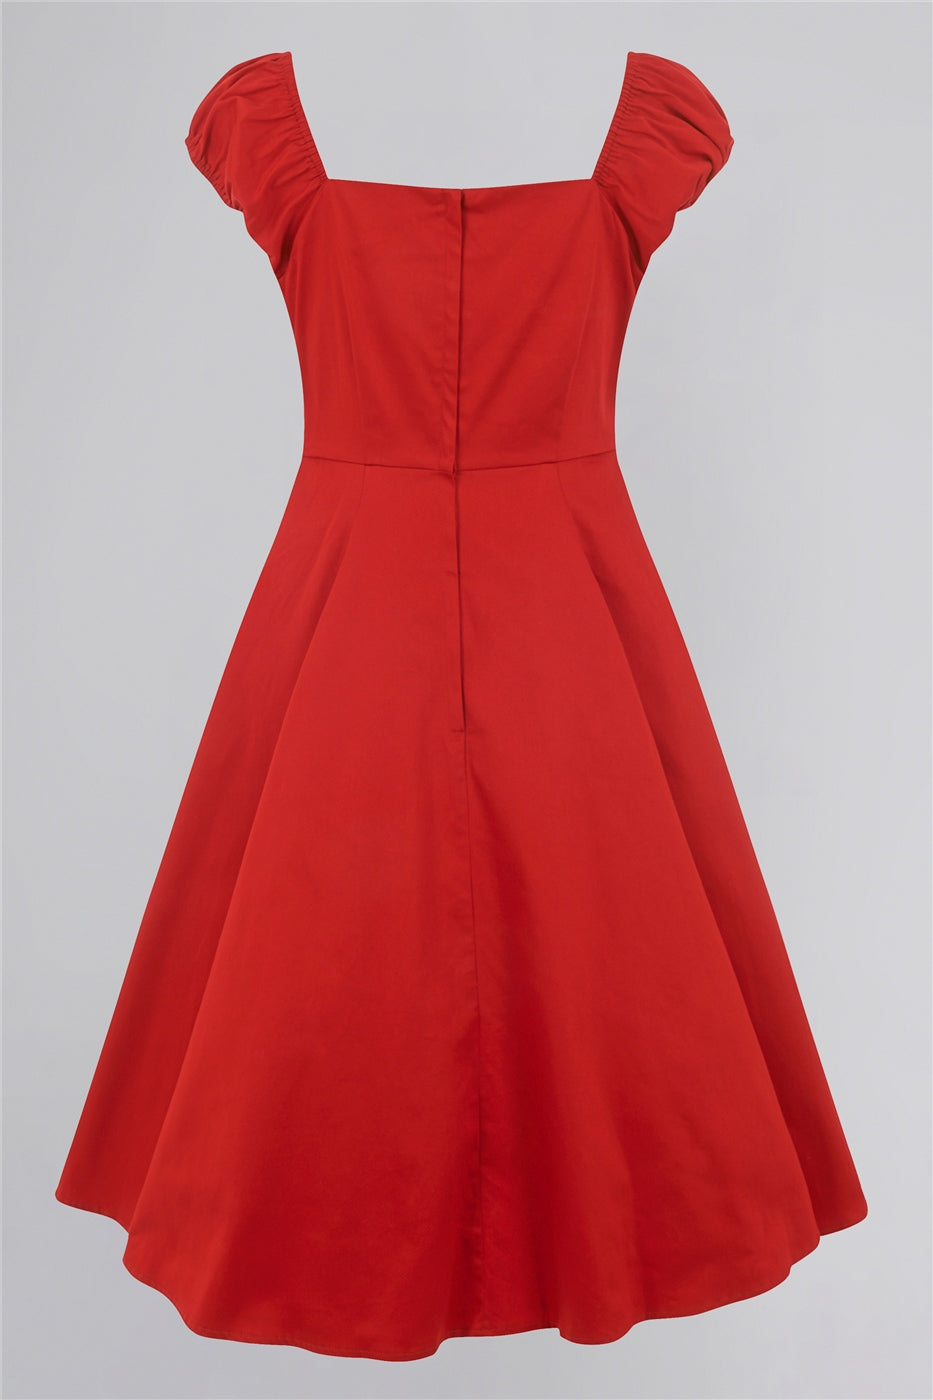 Dolores Classic Kleid in rot